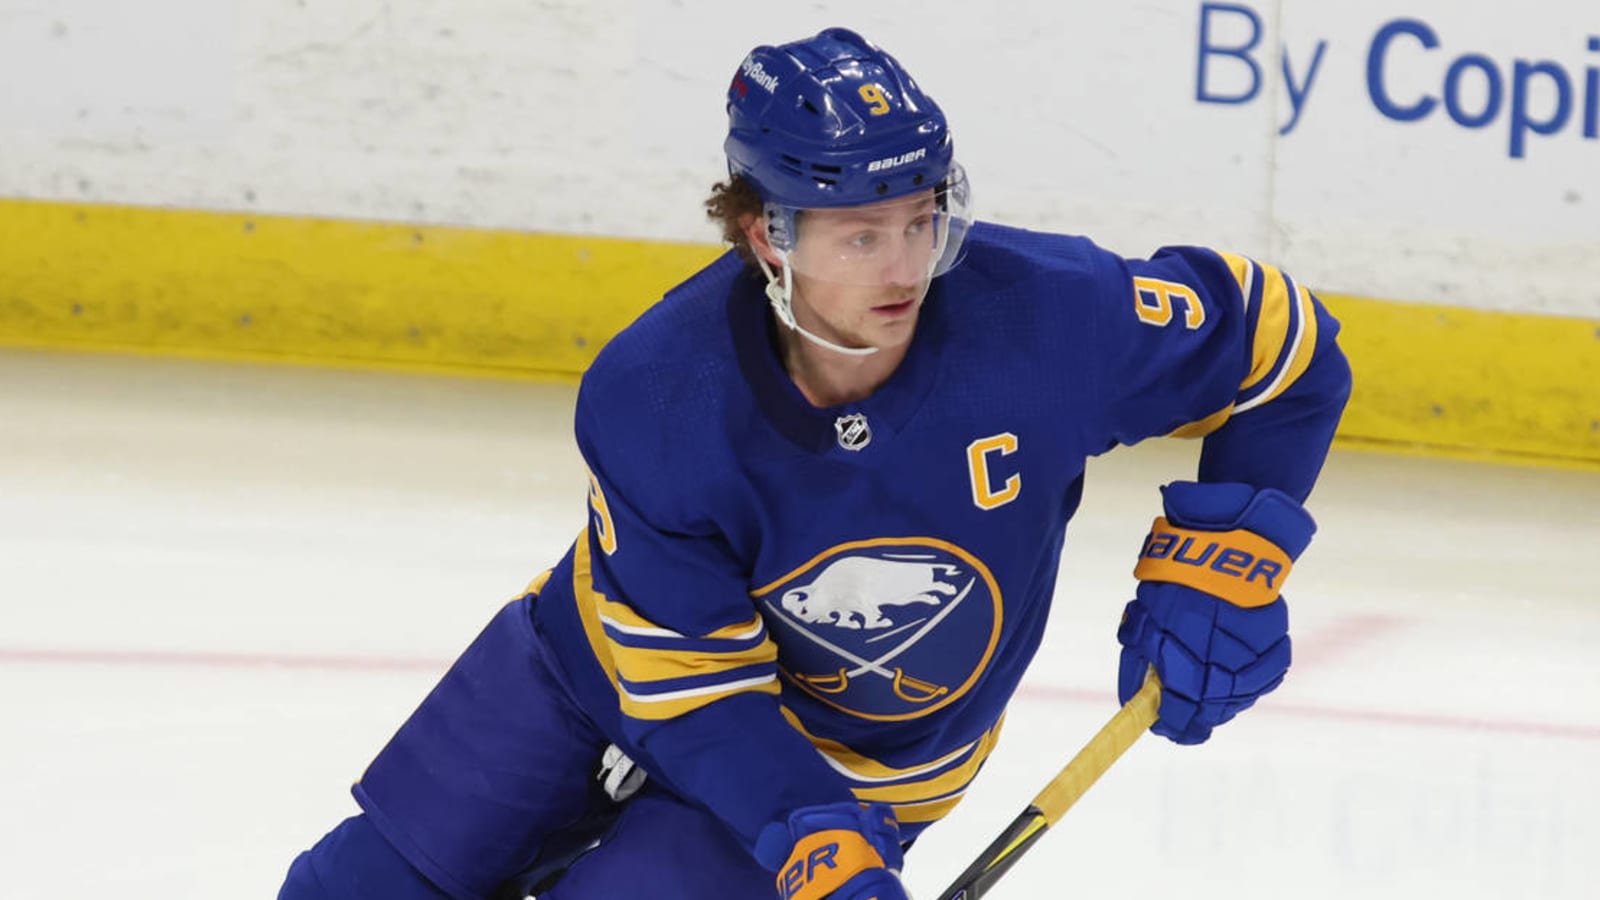 Jack Eichel cleared for contact for first time since surgery